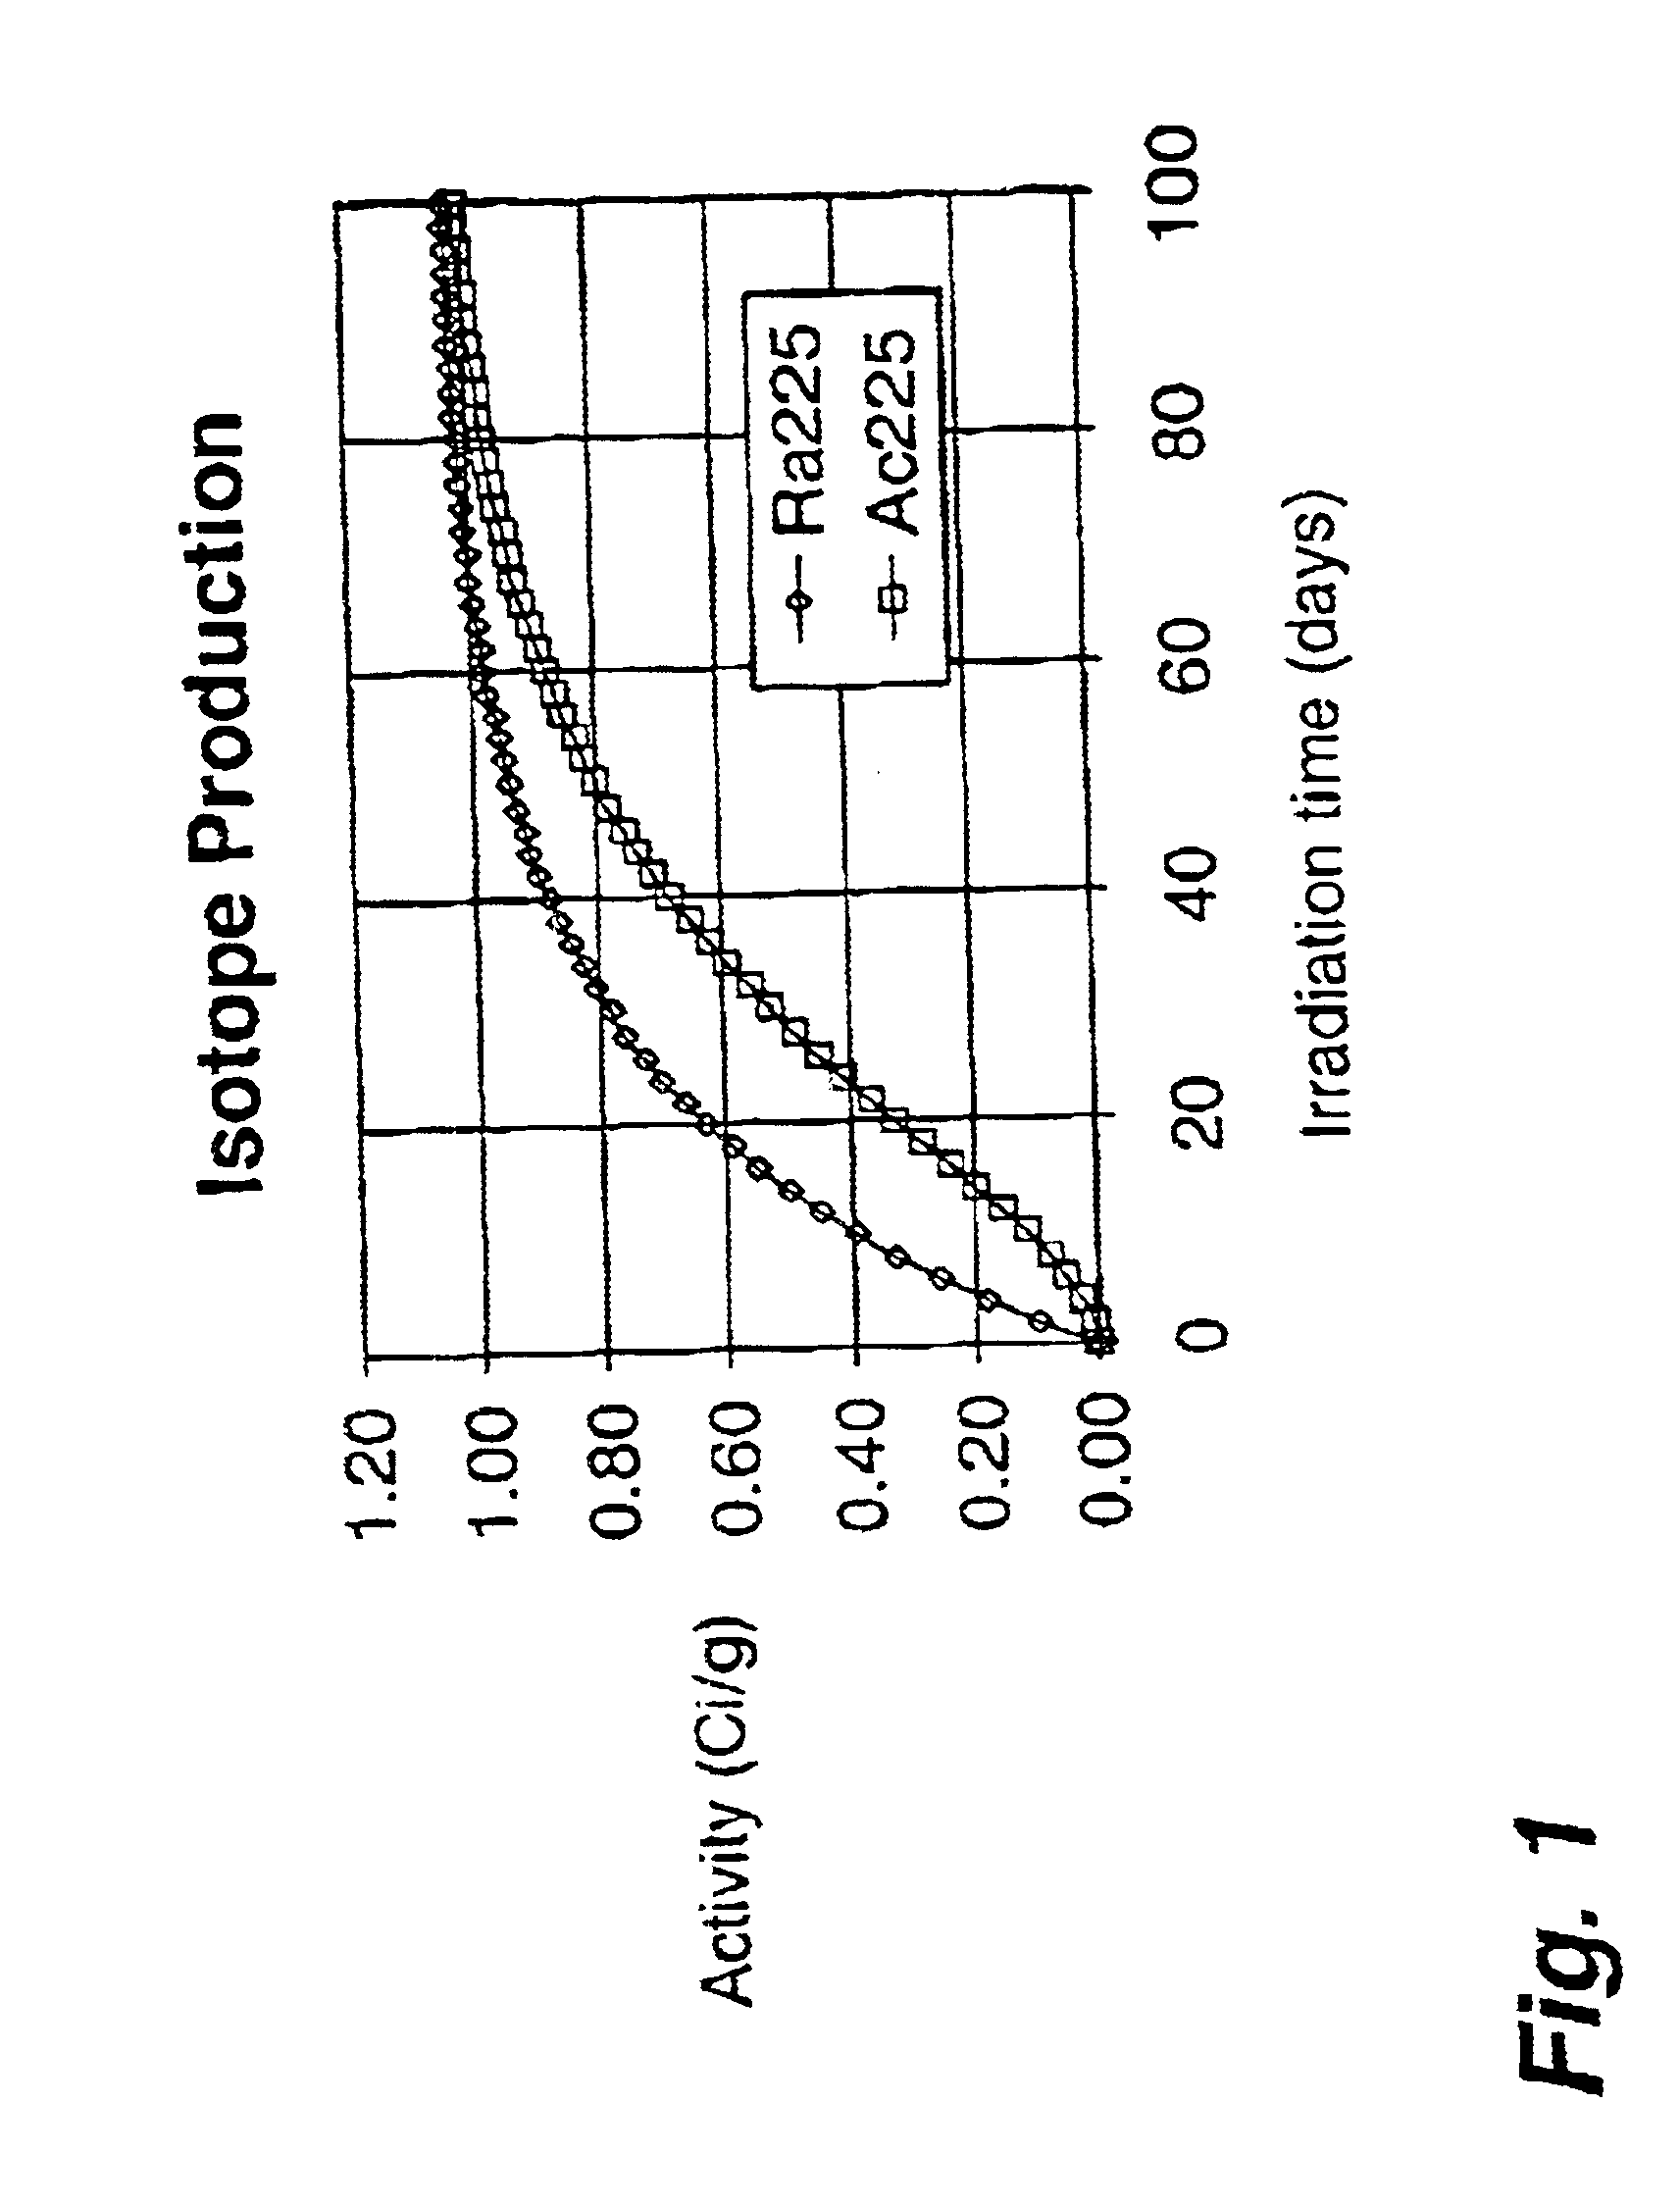 Method of producing Actinium-225 and daughters